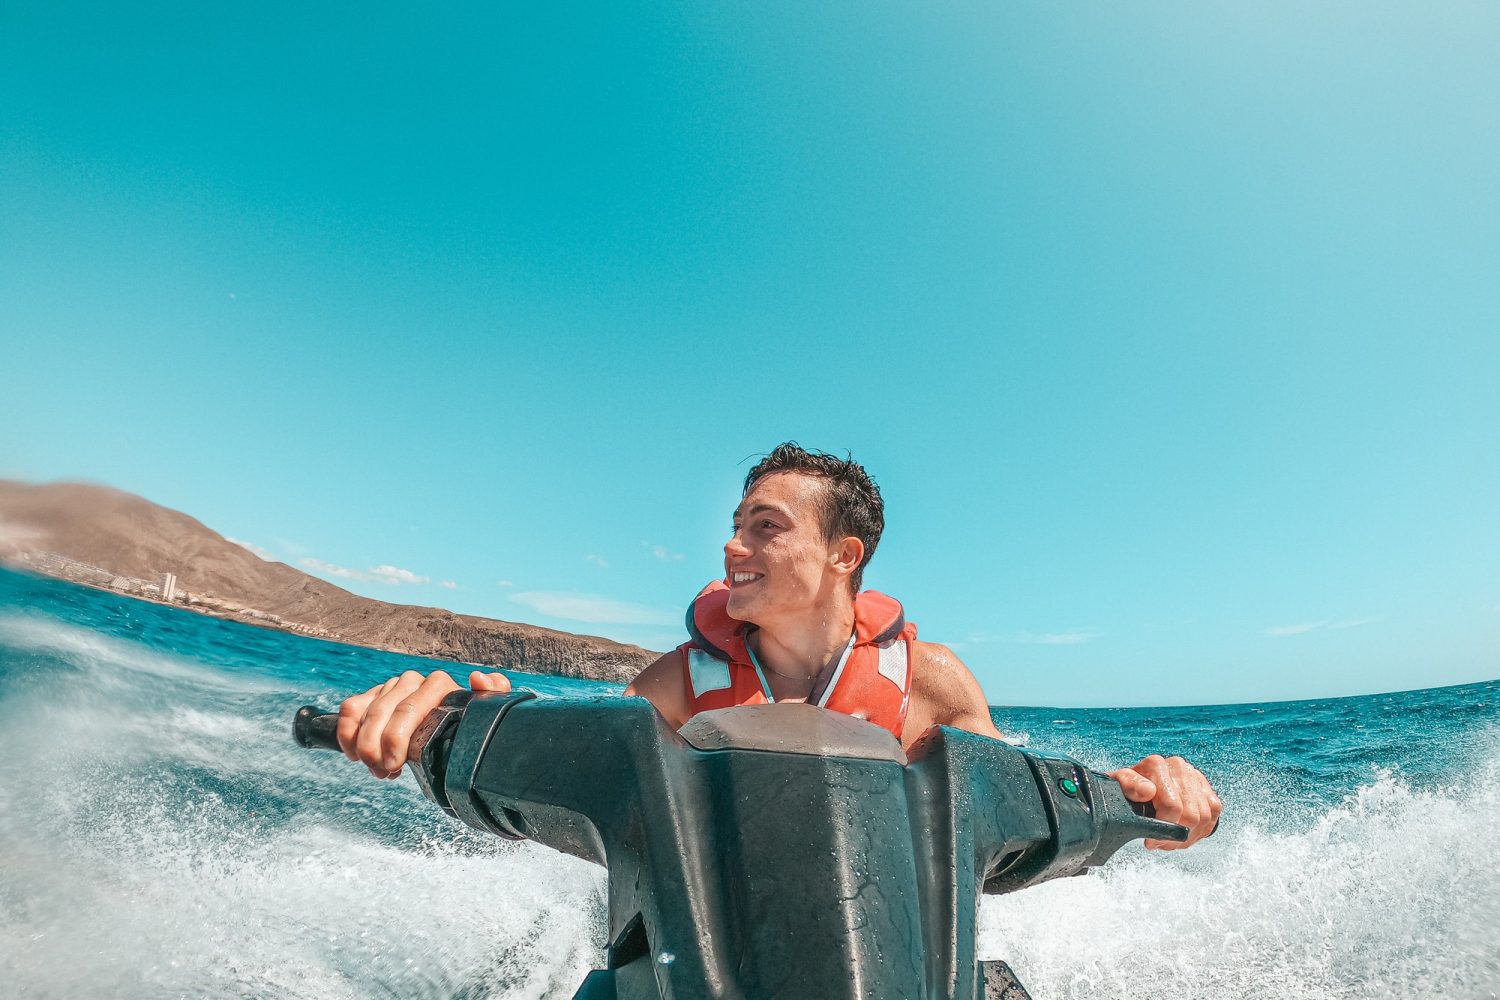 Teenager man enjoying summer in a jet ski in the middle of the sea having fun